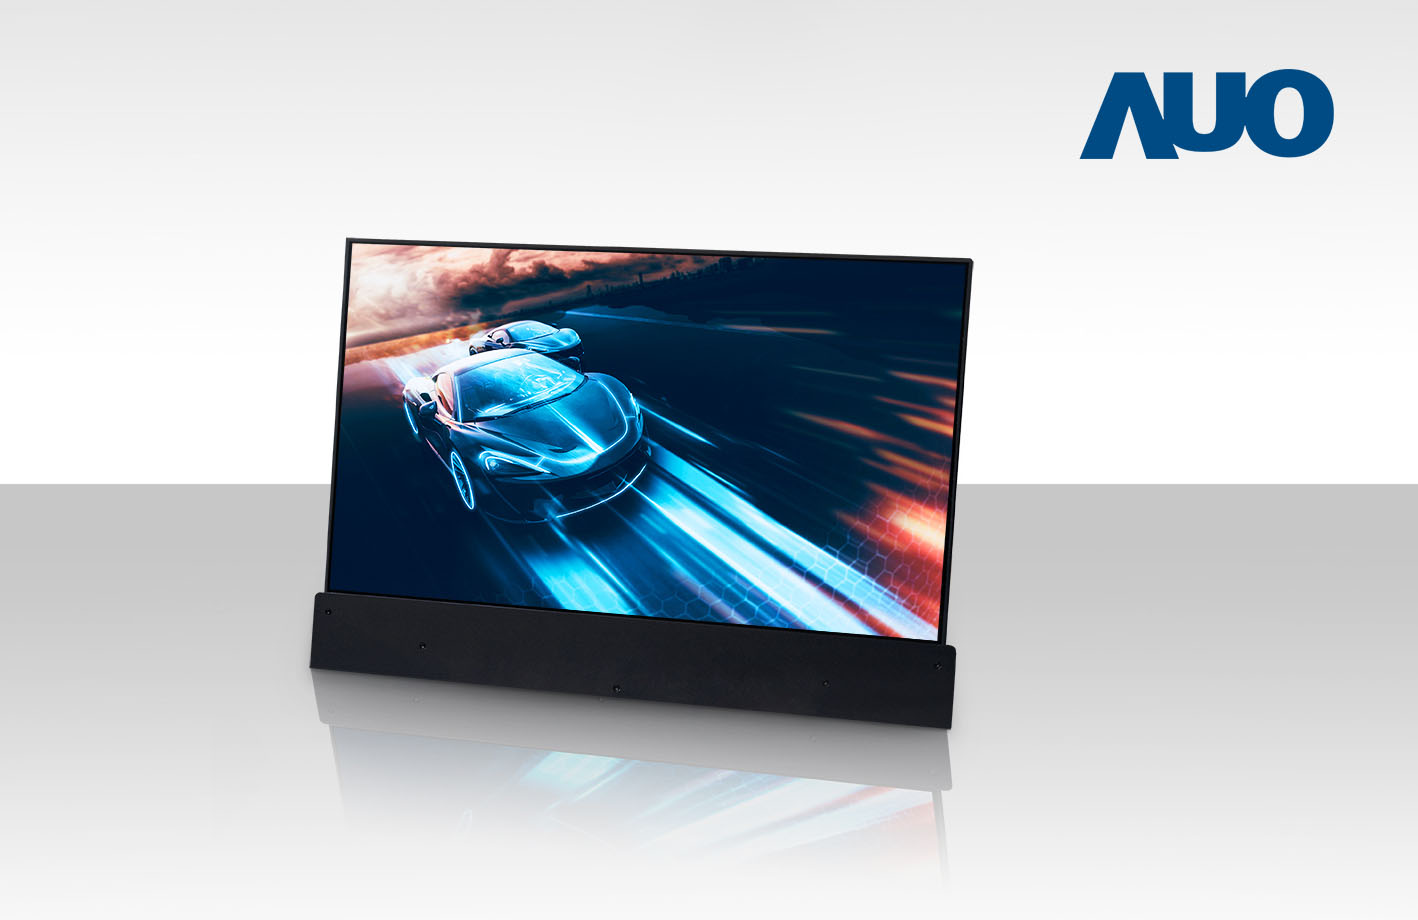 AUO’s Kunshan fab manufactures LTPS gaming notebook panels with an ultra-high refresh rate of 520Hz, continuously delivering innovative breakthroughs in high-end gaming products